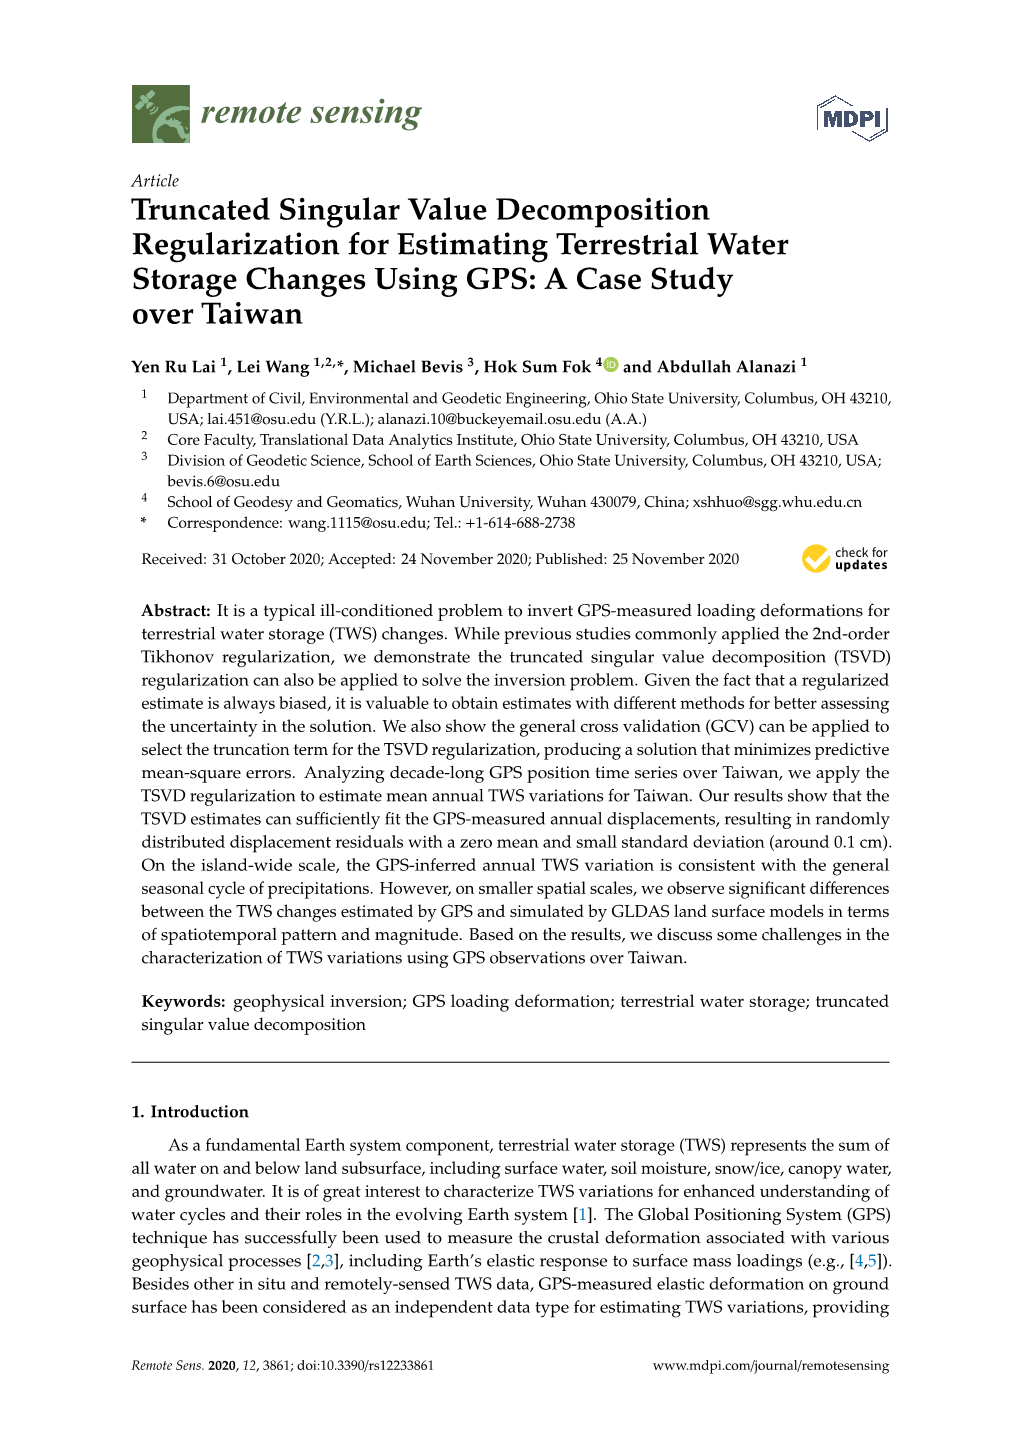 Truncated Singular Value Decomposition Regularization for Estimating Terrestrial Water Storage Changes Using GPS: a Case Study Over Taiwan